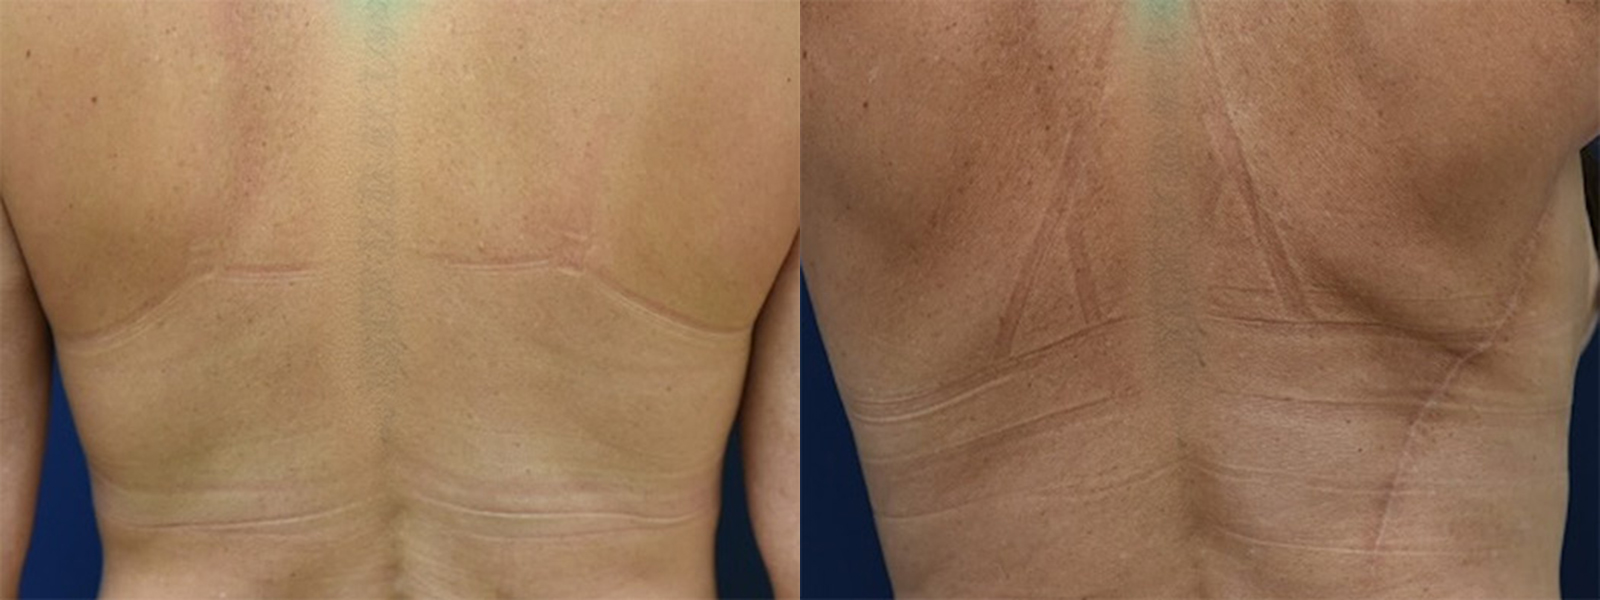 Latissimus Dorsi Before and After Photo by Dr. Leveque of Gulf Coast Plastic Surgery in Pensacola, FL